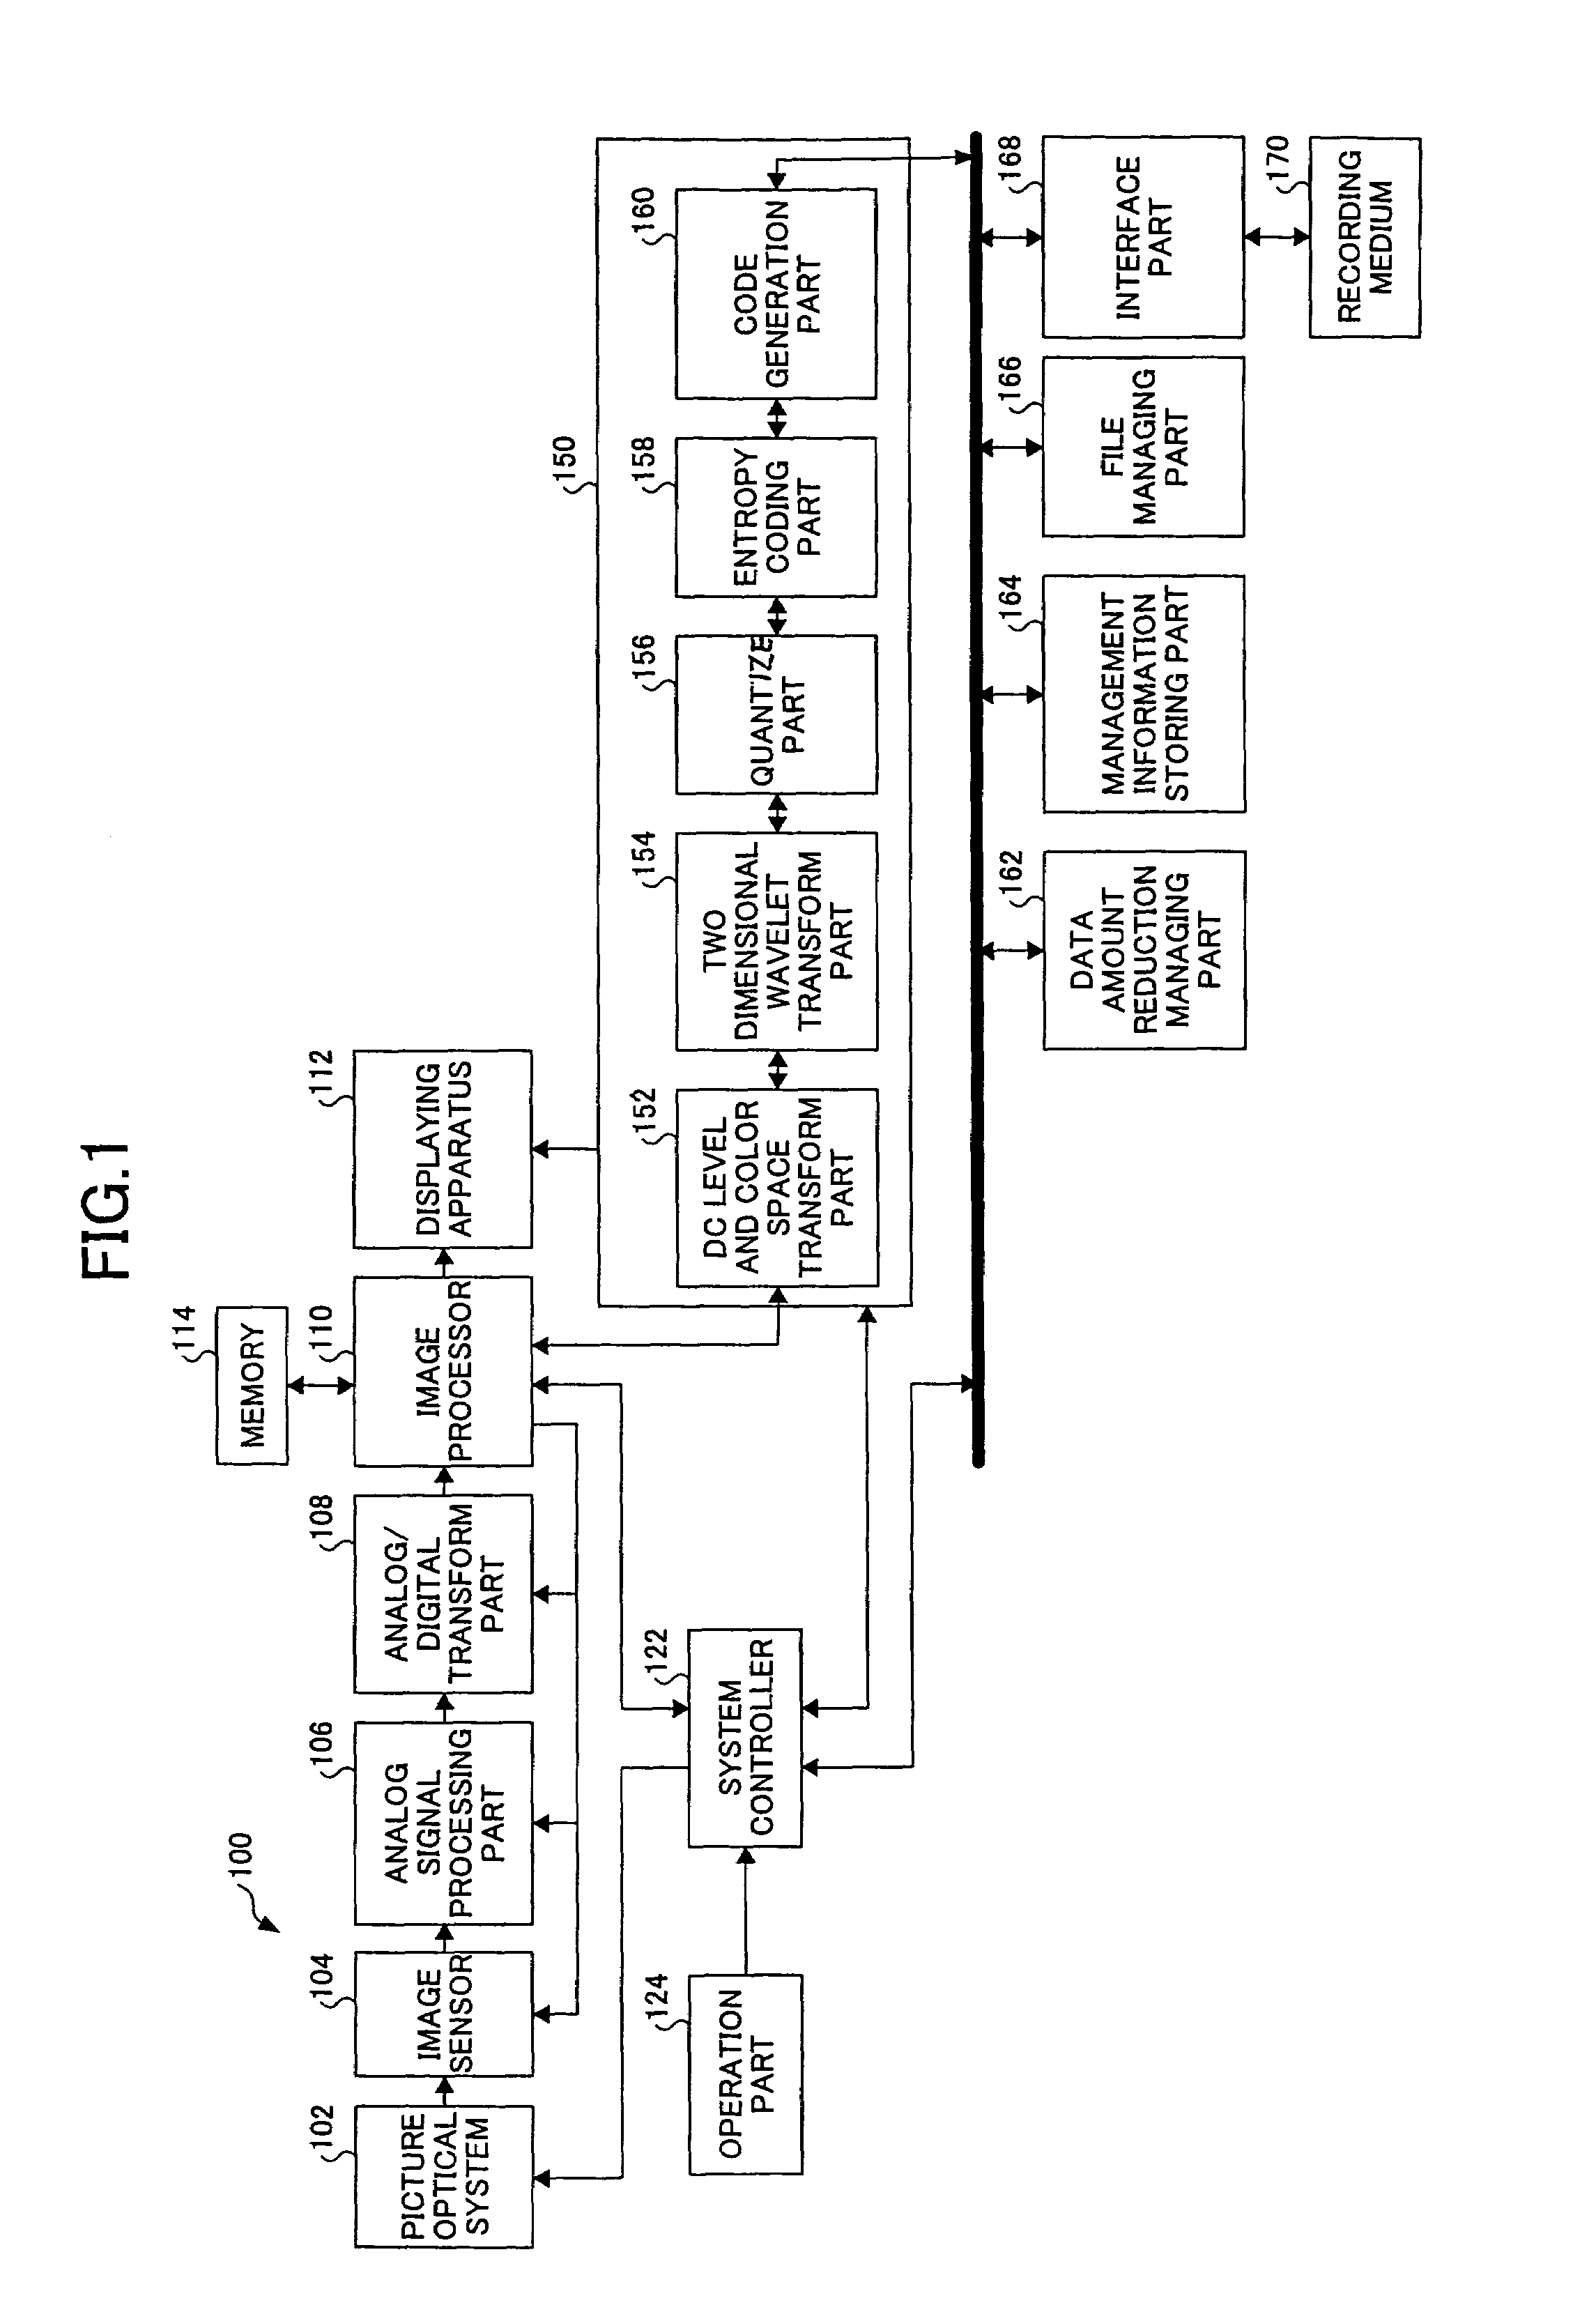 Image recording apparatus and image data selection method